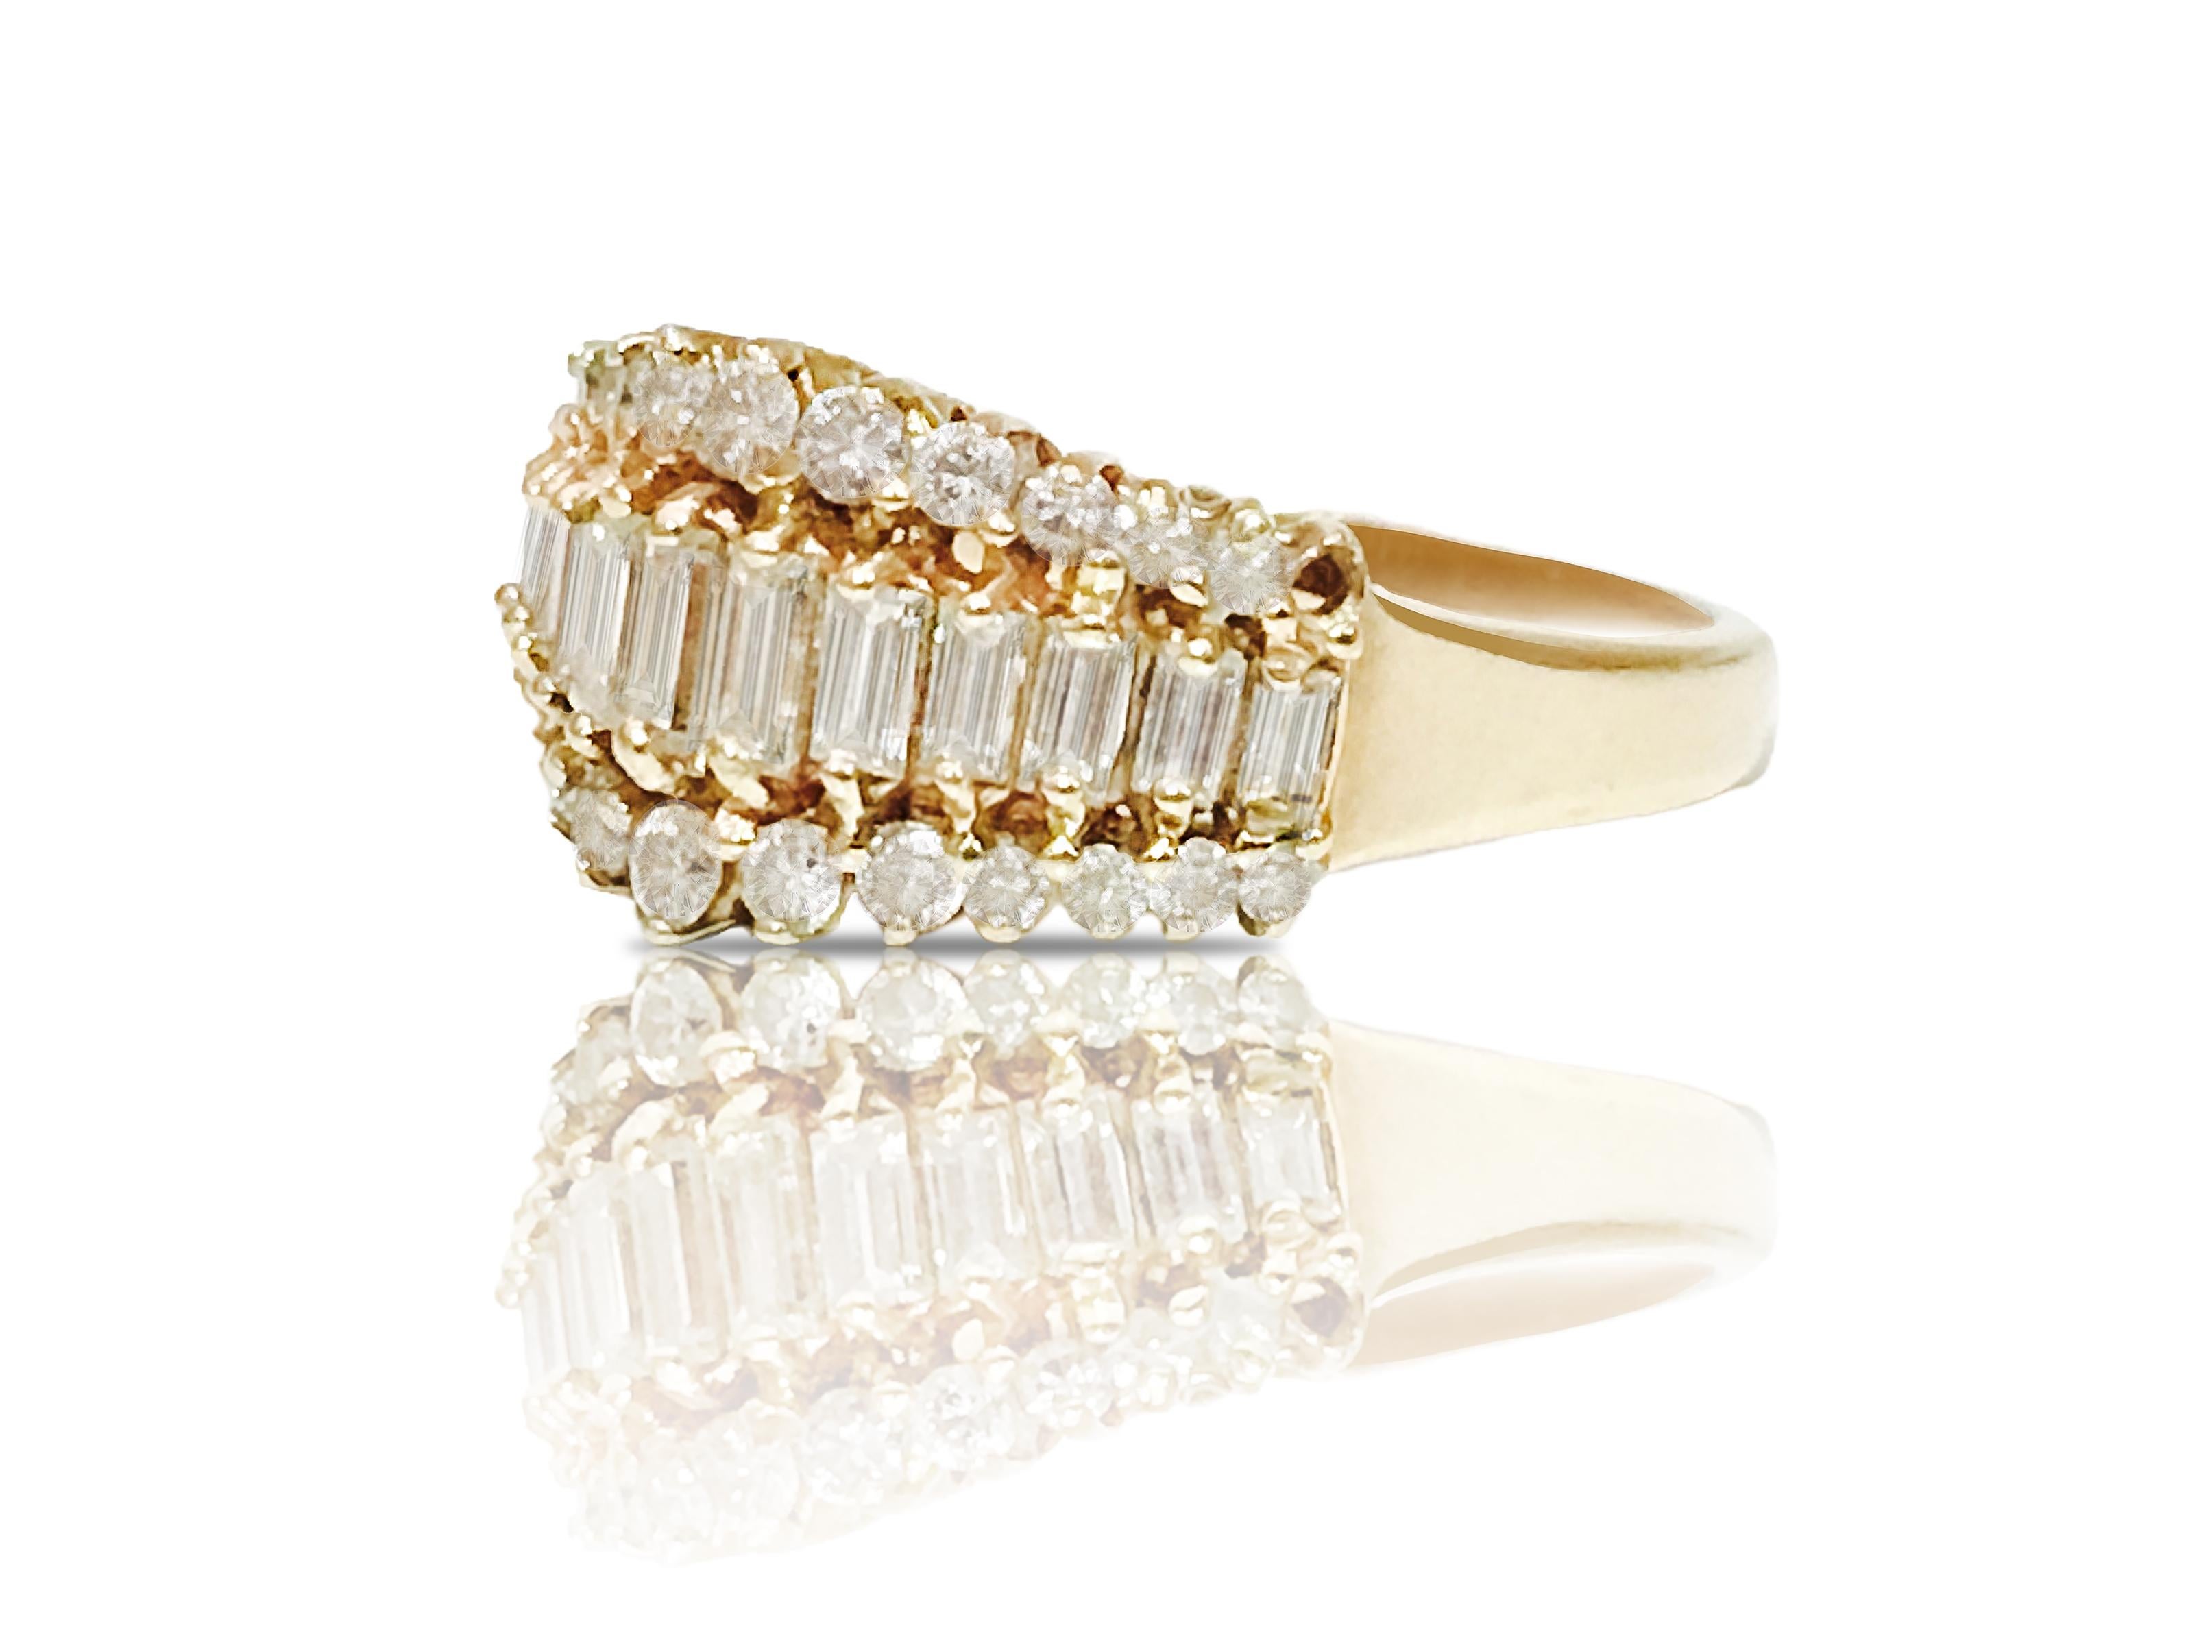 Metal: 14K yellow gold. 
Total carat weight of the diamonds: 1.00 carats. Round brilliant and baguette cut diamonds set in prongs. VS clarity and F-G color. 

Ring size: US 6.25. Free ring resizing available. 